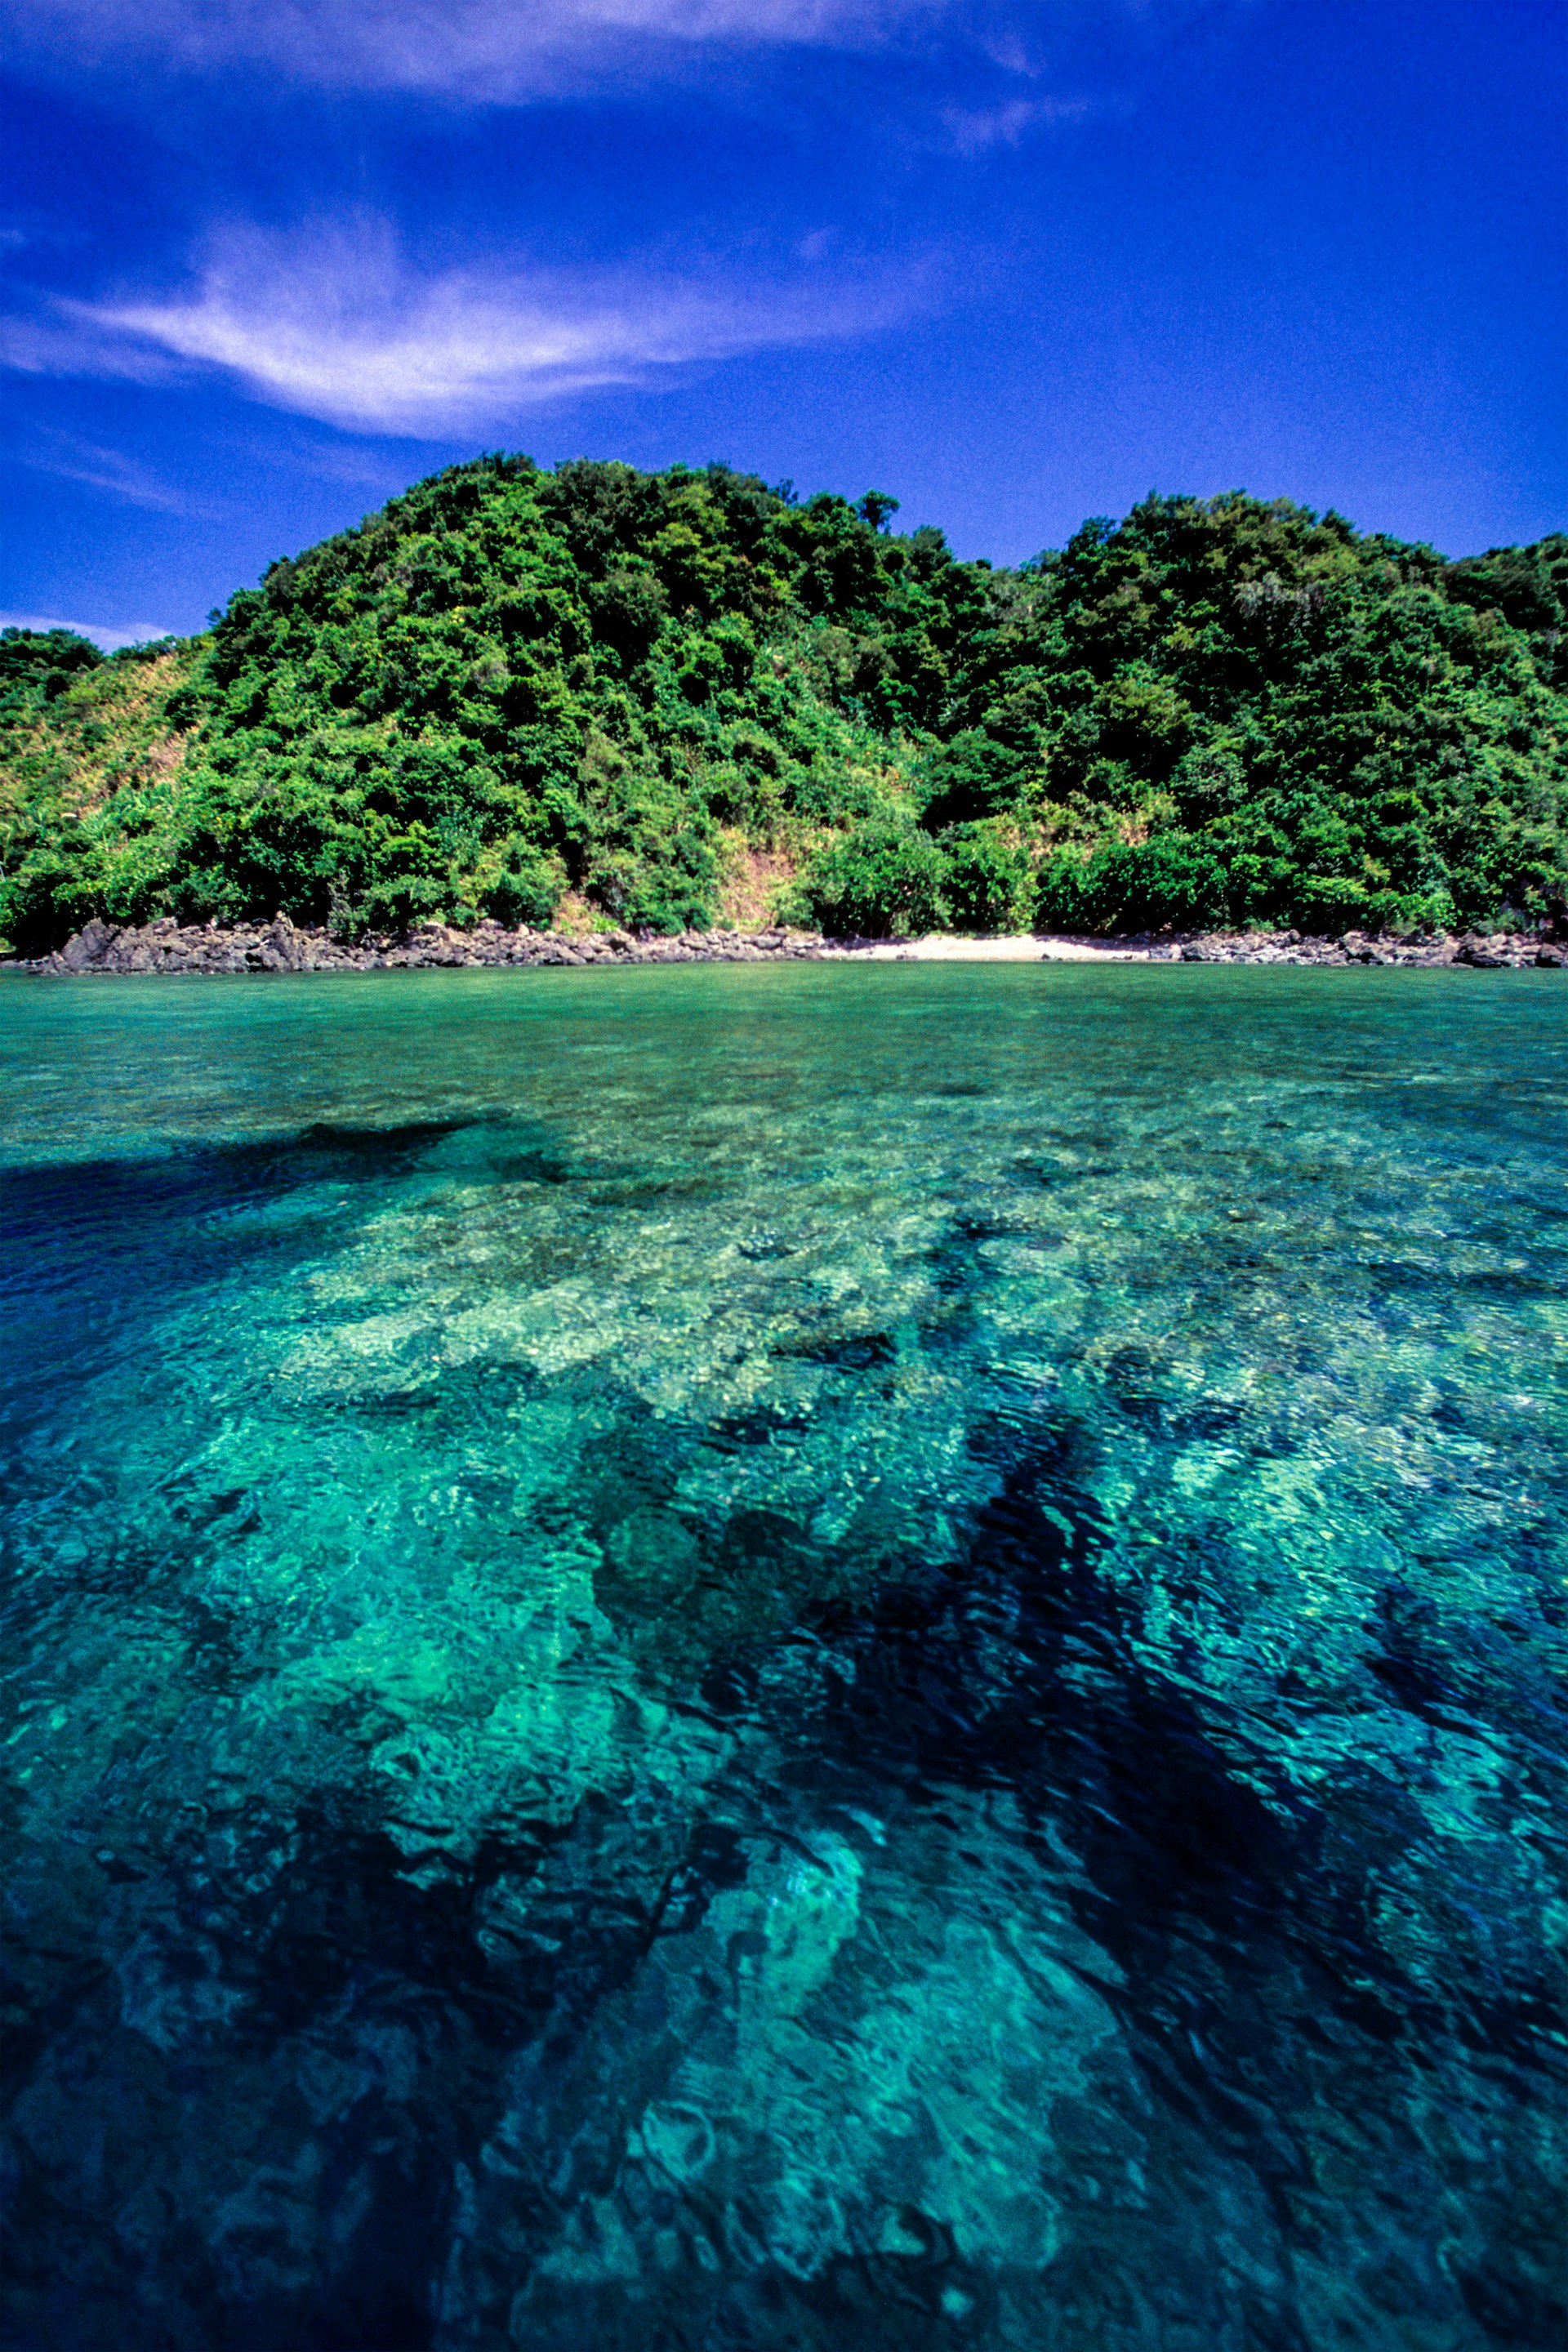 A coral reef is visible beneath the surface of the shallow blue waters of Catanduanes Island. A green, forested island is visible in the background.